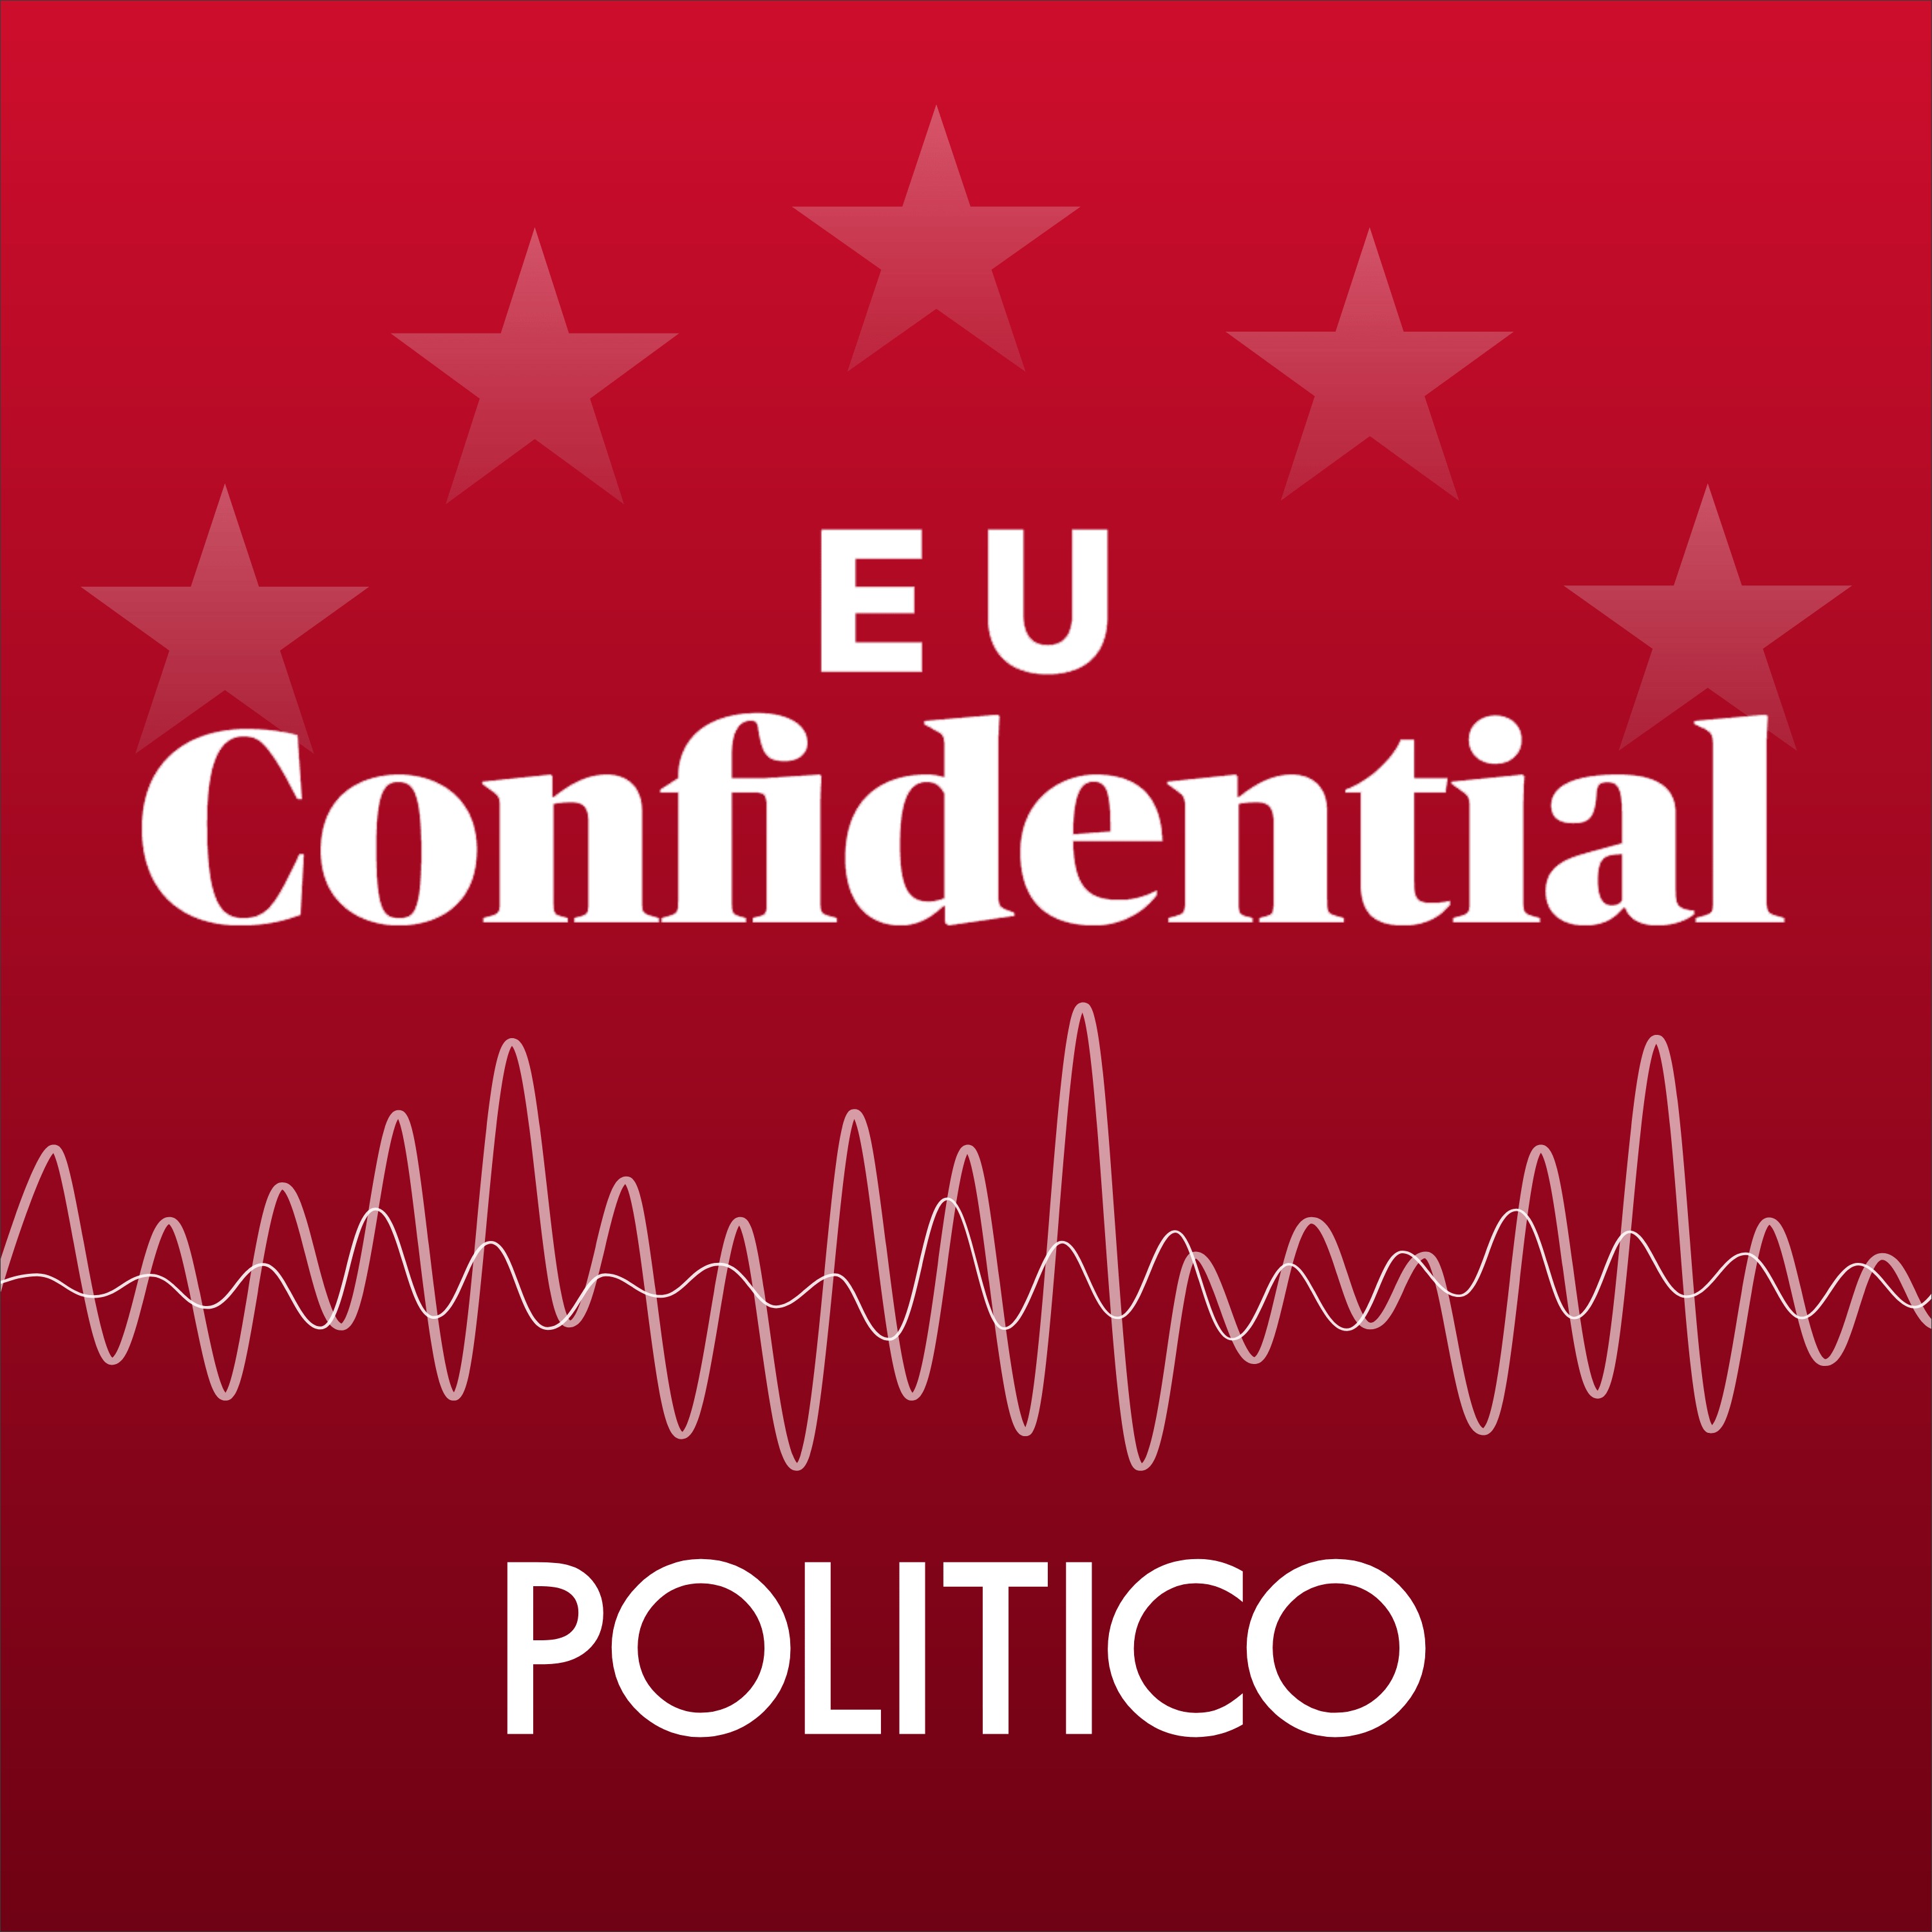 Portuguese voters’ anger and what it means for Europe